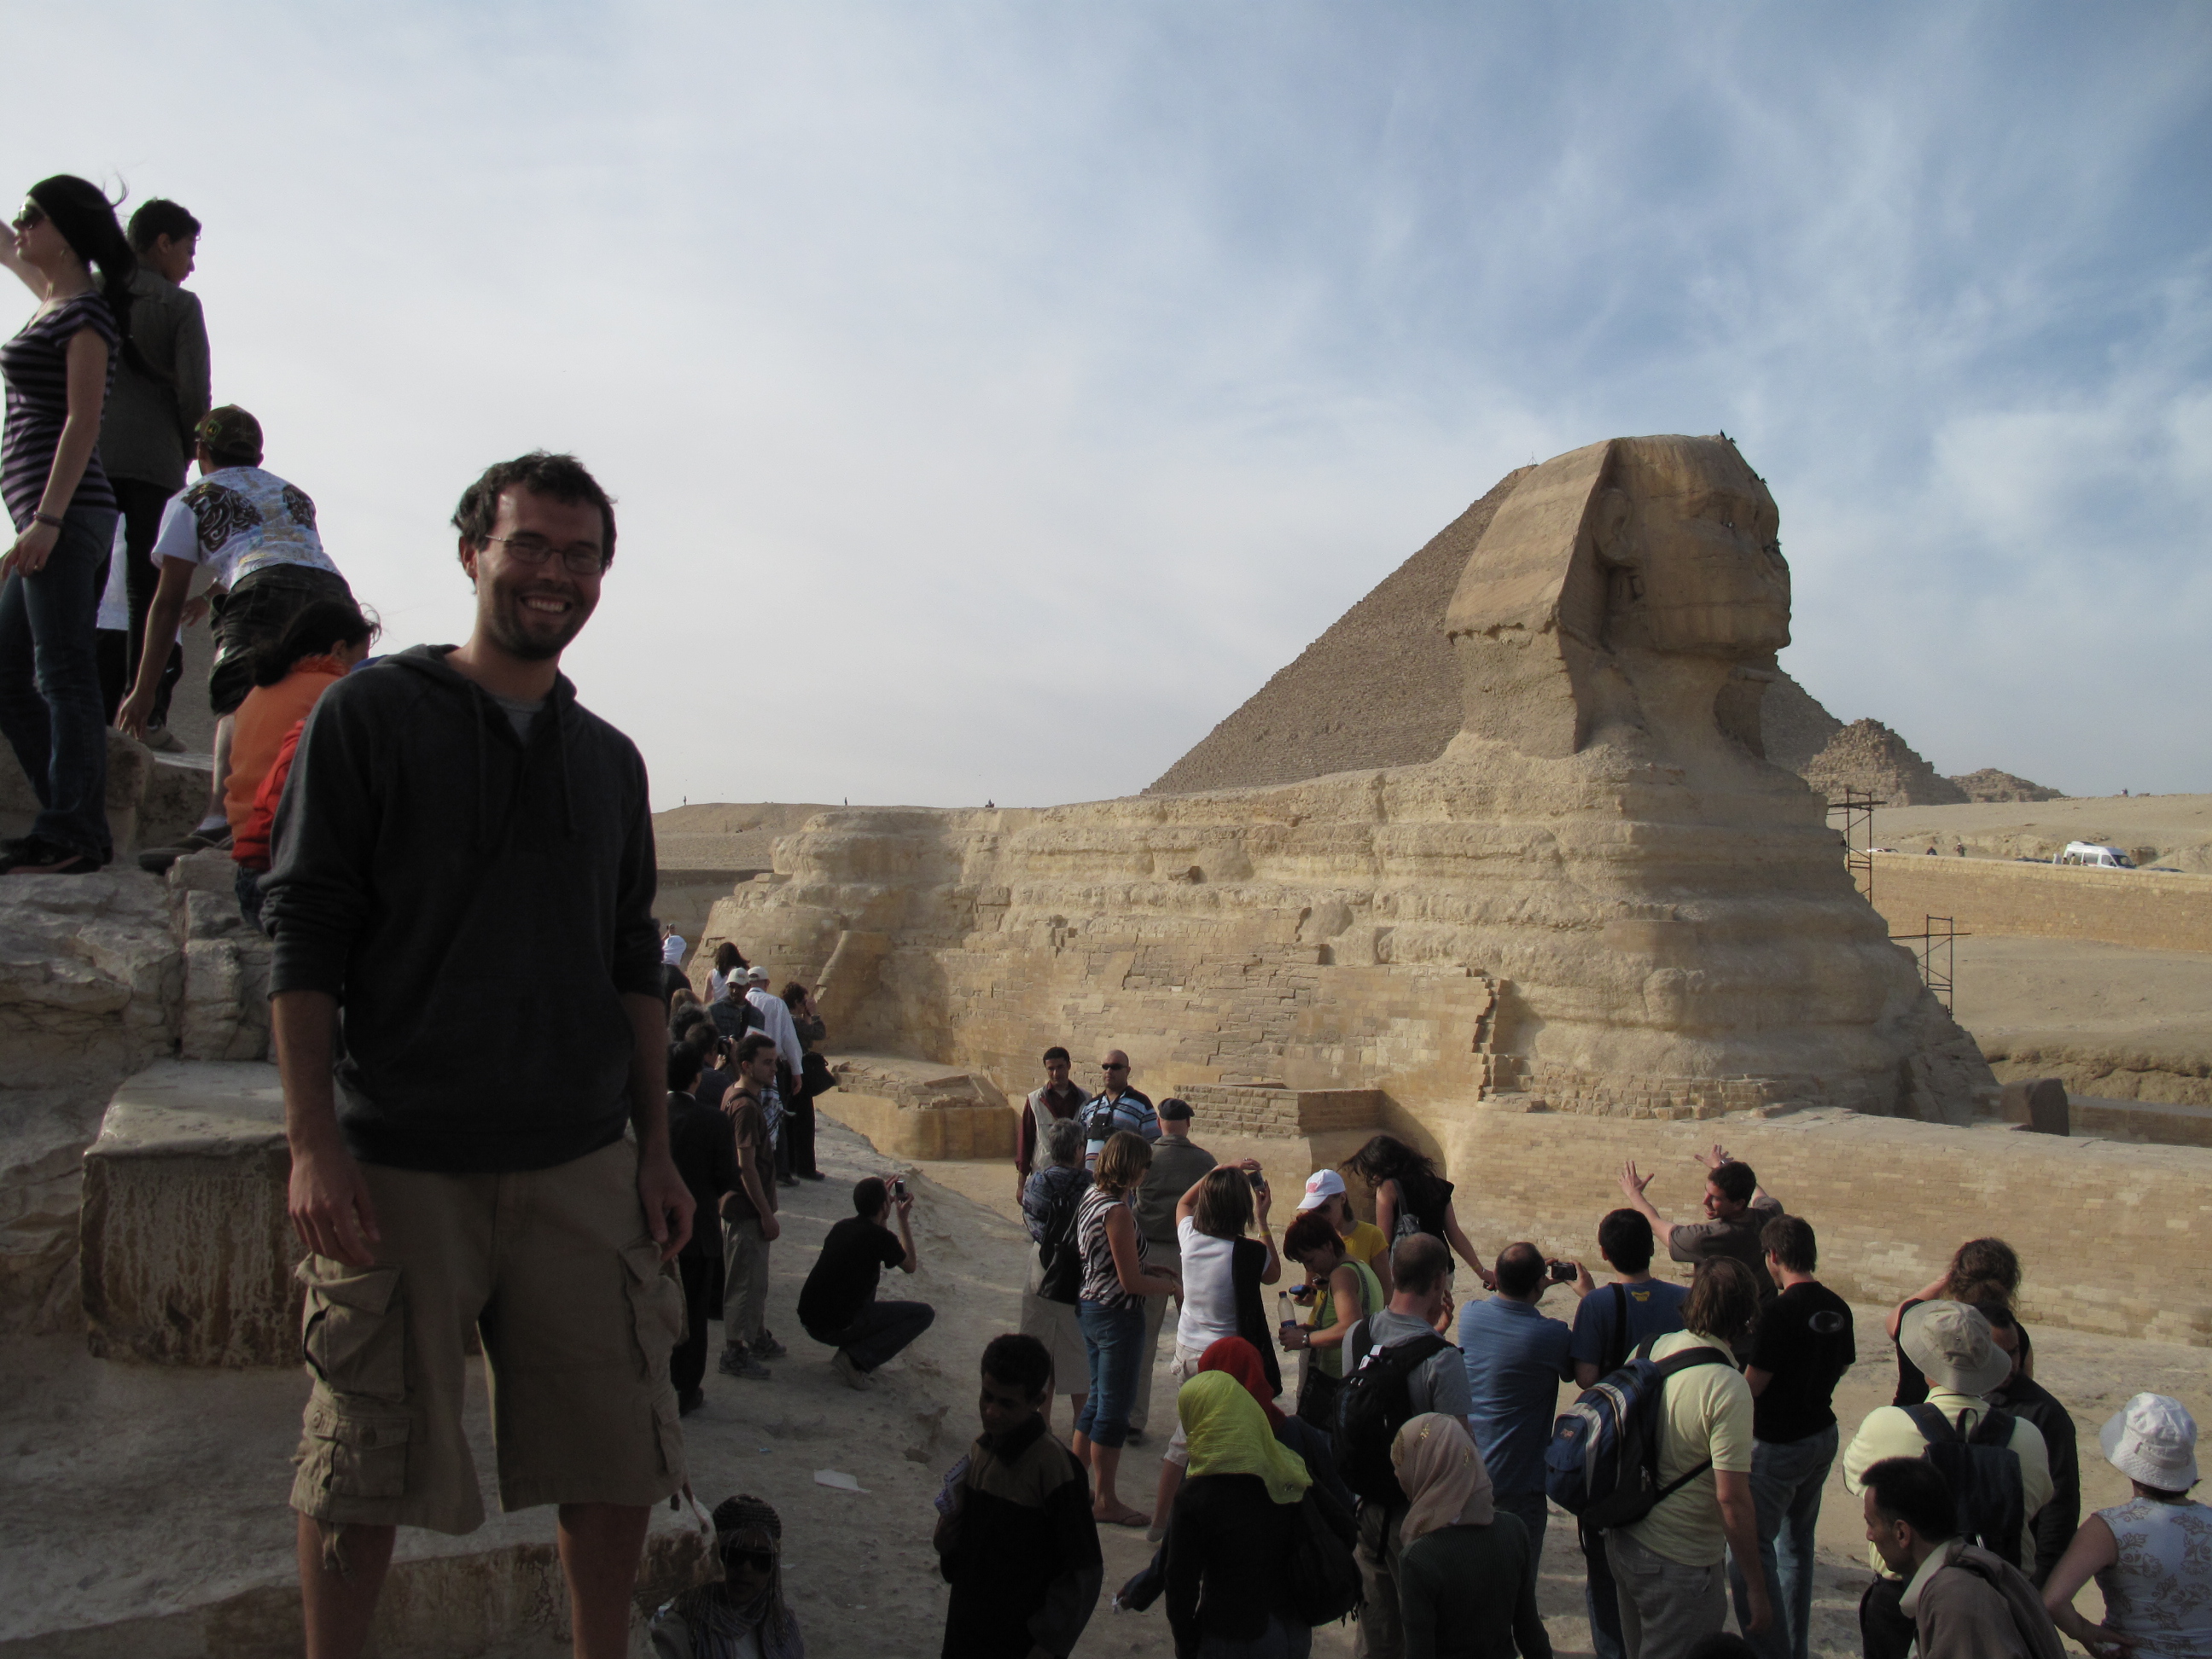 This is a picture of me again next to the Sphinx.